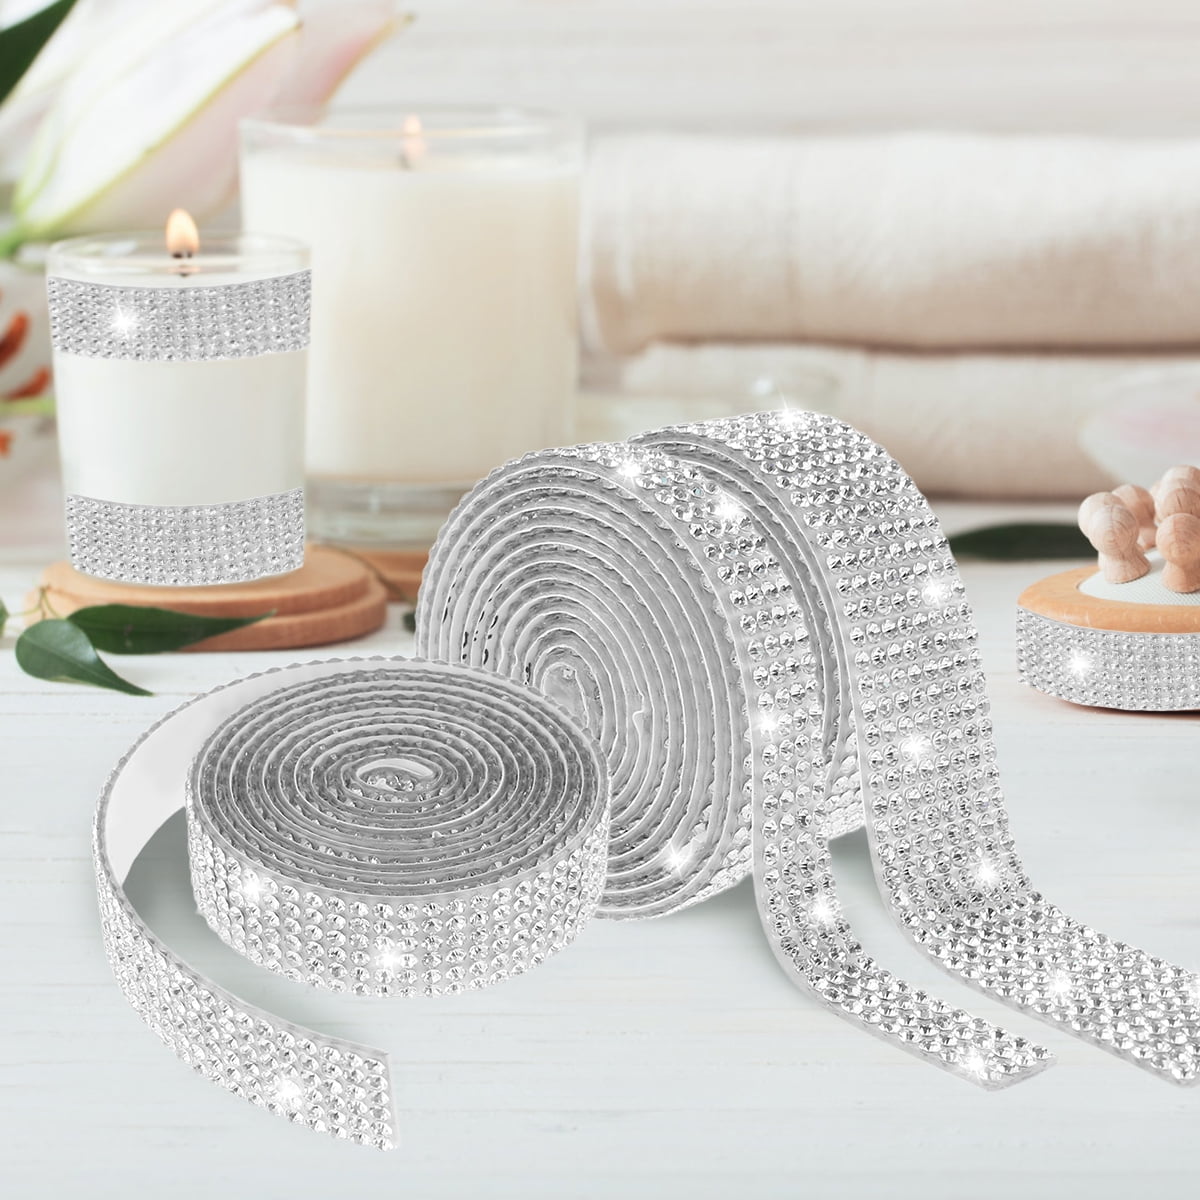  Ciieeo 3 Rolls Glass Rhinestone Band Clothing Trim DIY Craft  Ribbon Rhinestone Trim by The Yard The Rose Diamonds for Flower Bouquets  Clothes Accessory Cake The Iron Bride Self-Adhesive